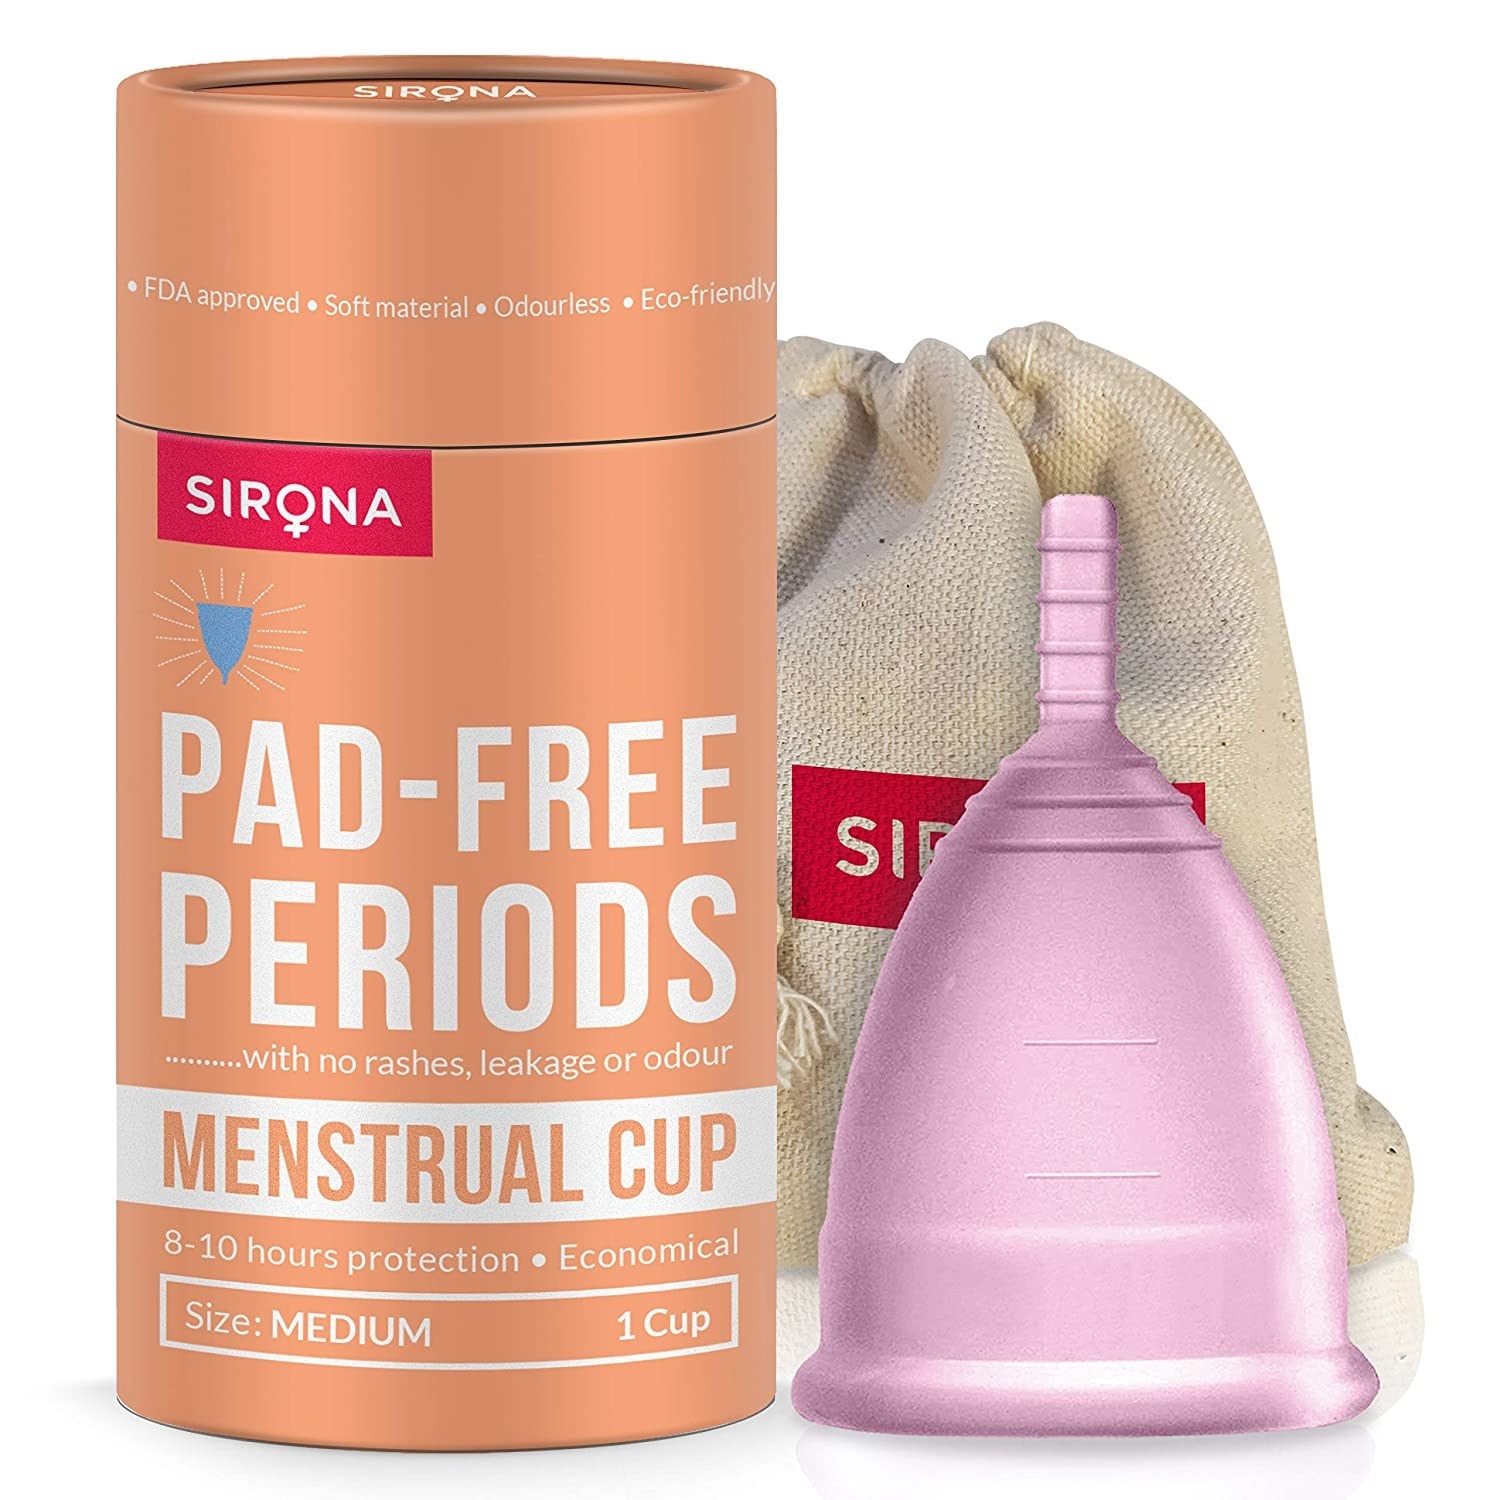 A menstrual cup next to the packaging